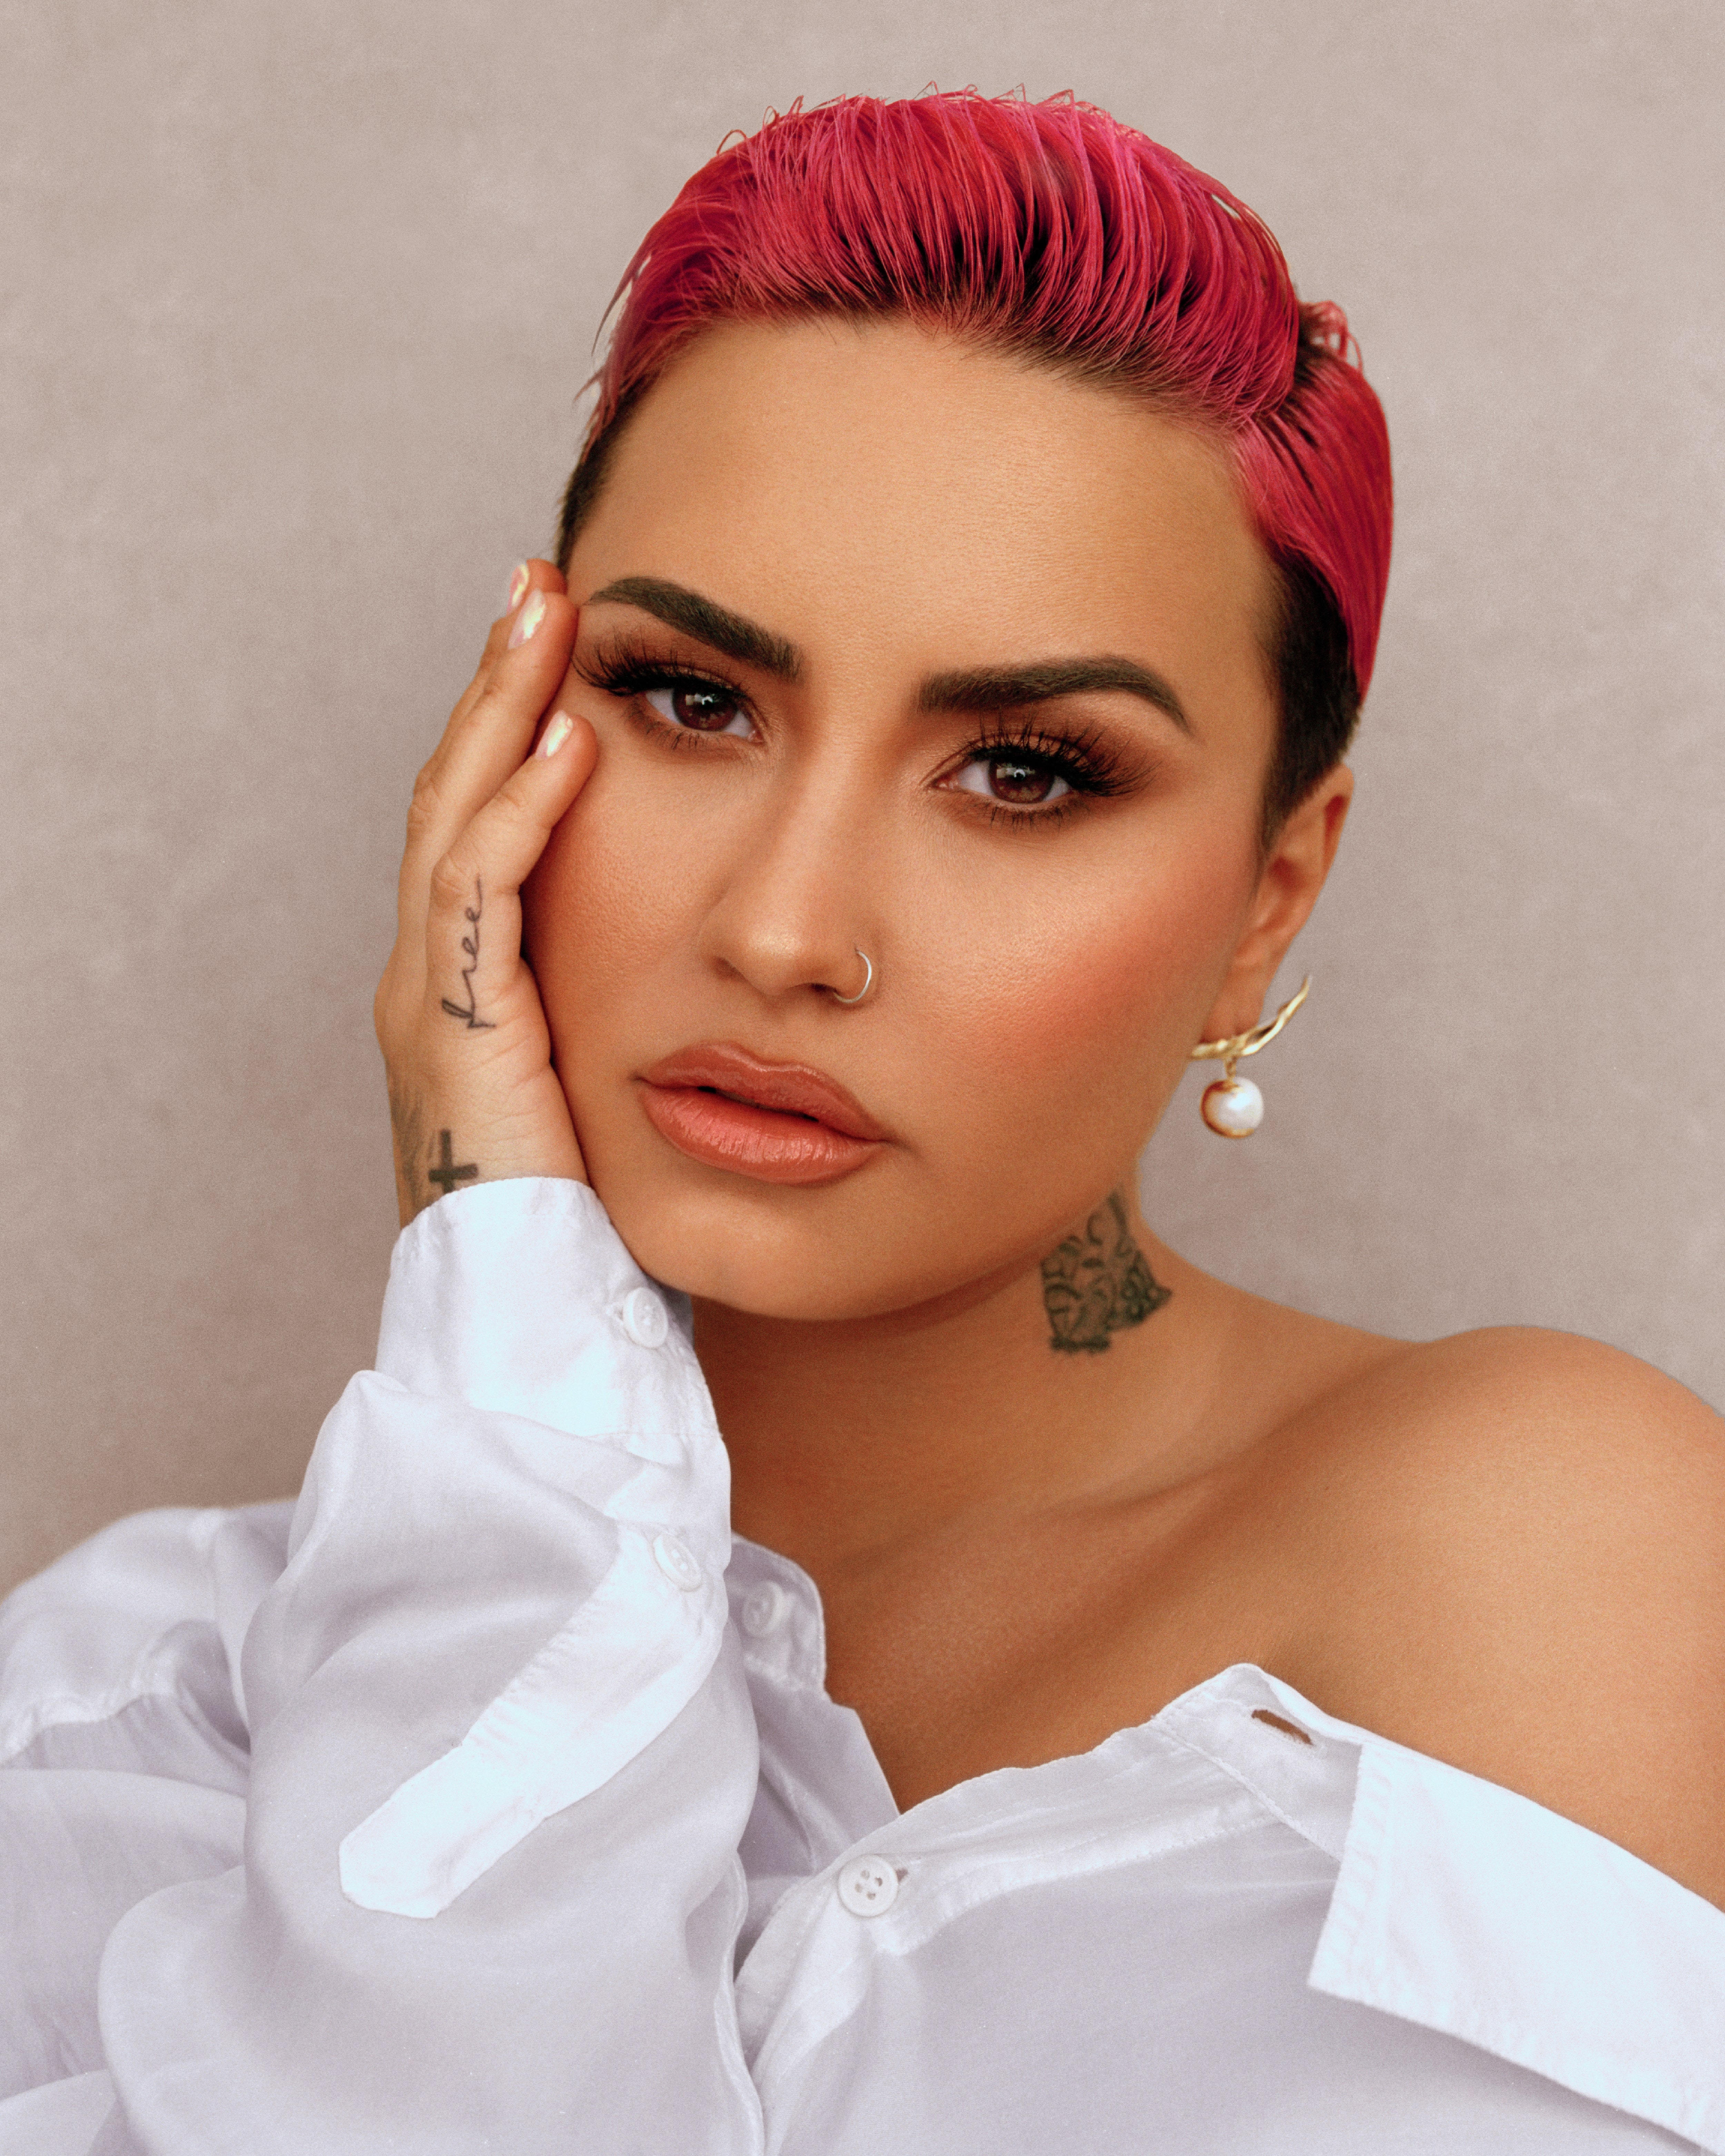 Demi Lovato Women Pink Hair Dyed Hair Celebrity Singer Looking At Viewer Bare Shoulders Inked Tattoo 5000x6250